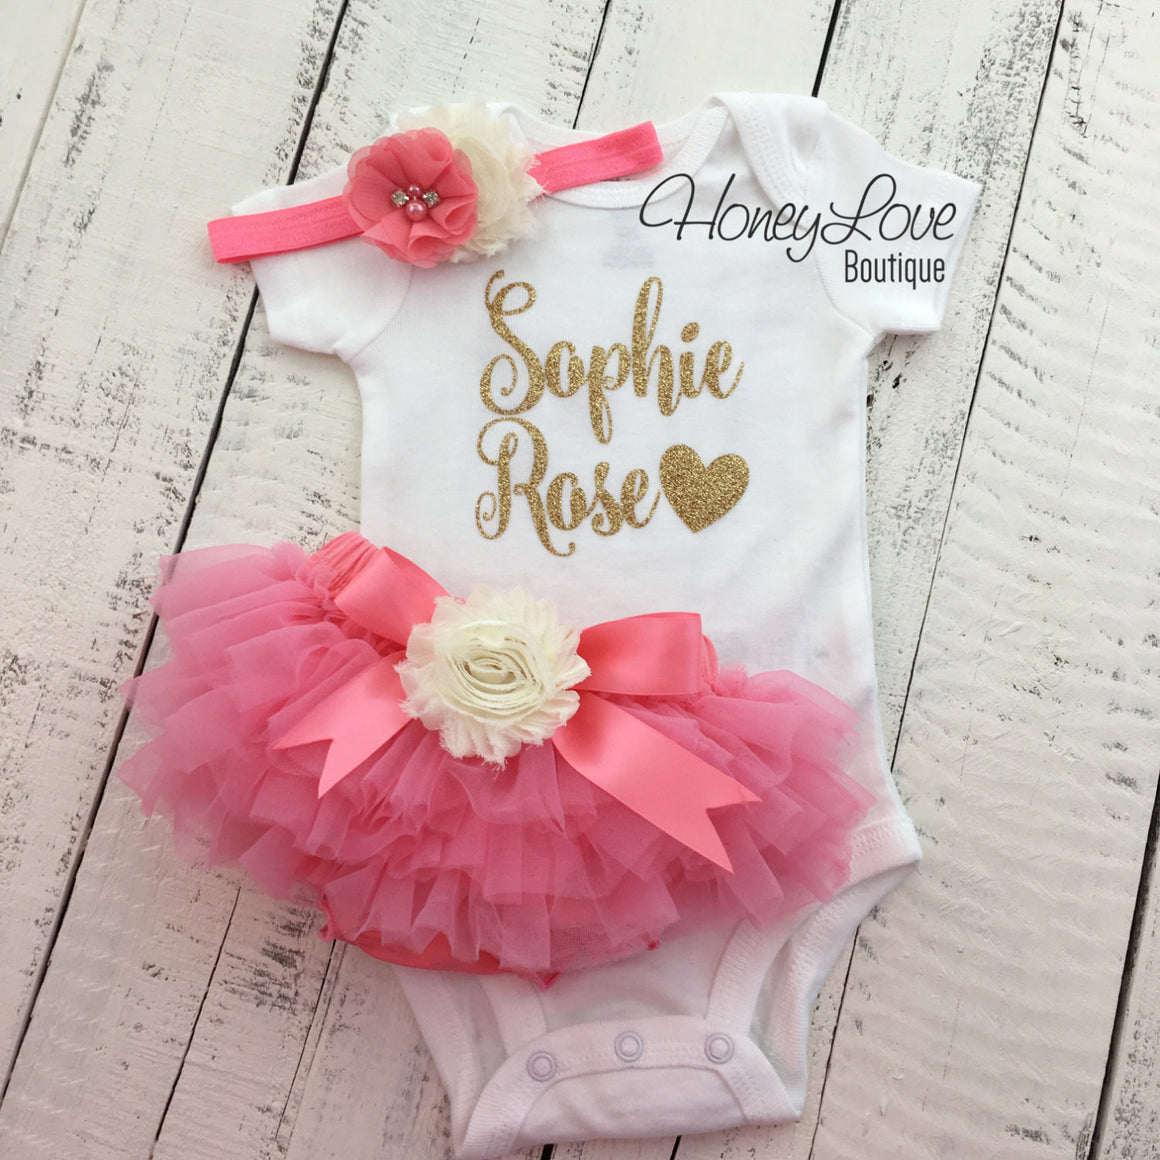 PERSONALIZED Name Outfit - Coral Pink and Gold Glitter - Ivory flower embellished tutu skirt bloomers - HoneyLoveBoutique